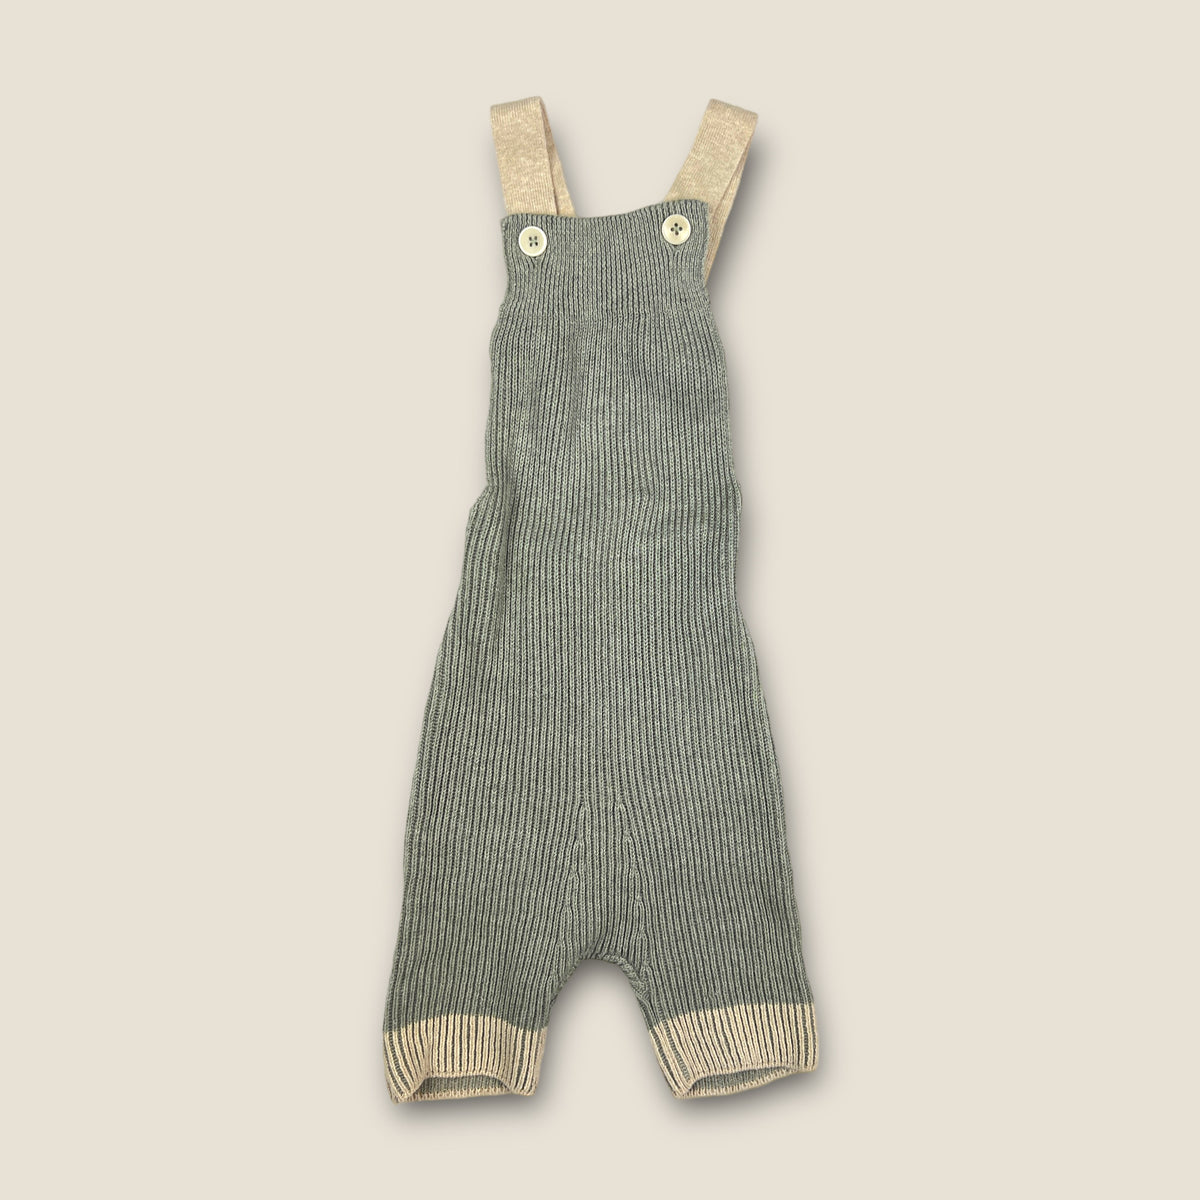 Mabli Knitted Cotton Dungarees size 18 months